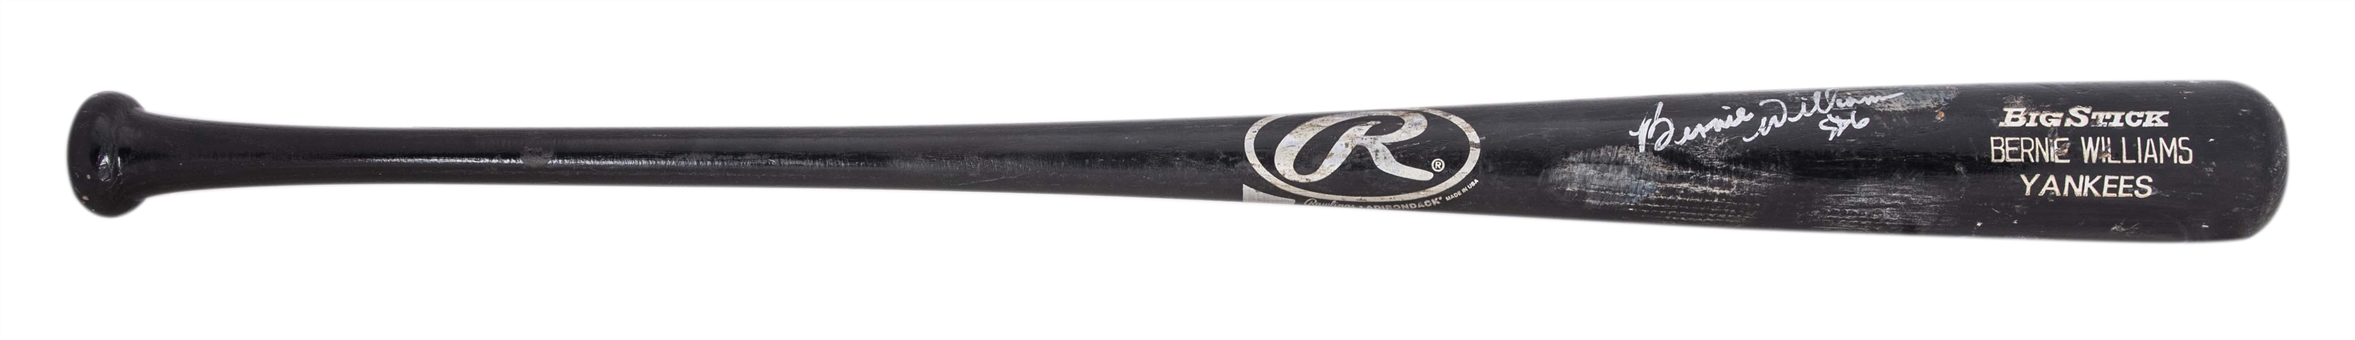 1997 Bernie Williams Game Used & Signed Rawlings DW20 Model Bat From The Willie Randolph Collection (PSA/DNA GU 9.5, Randolph LOA & Beckett)